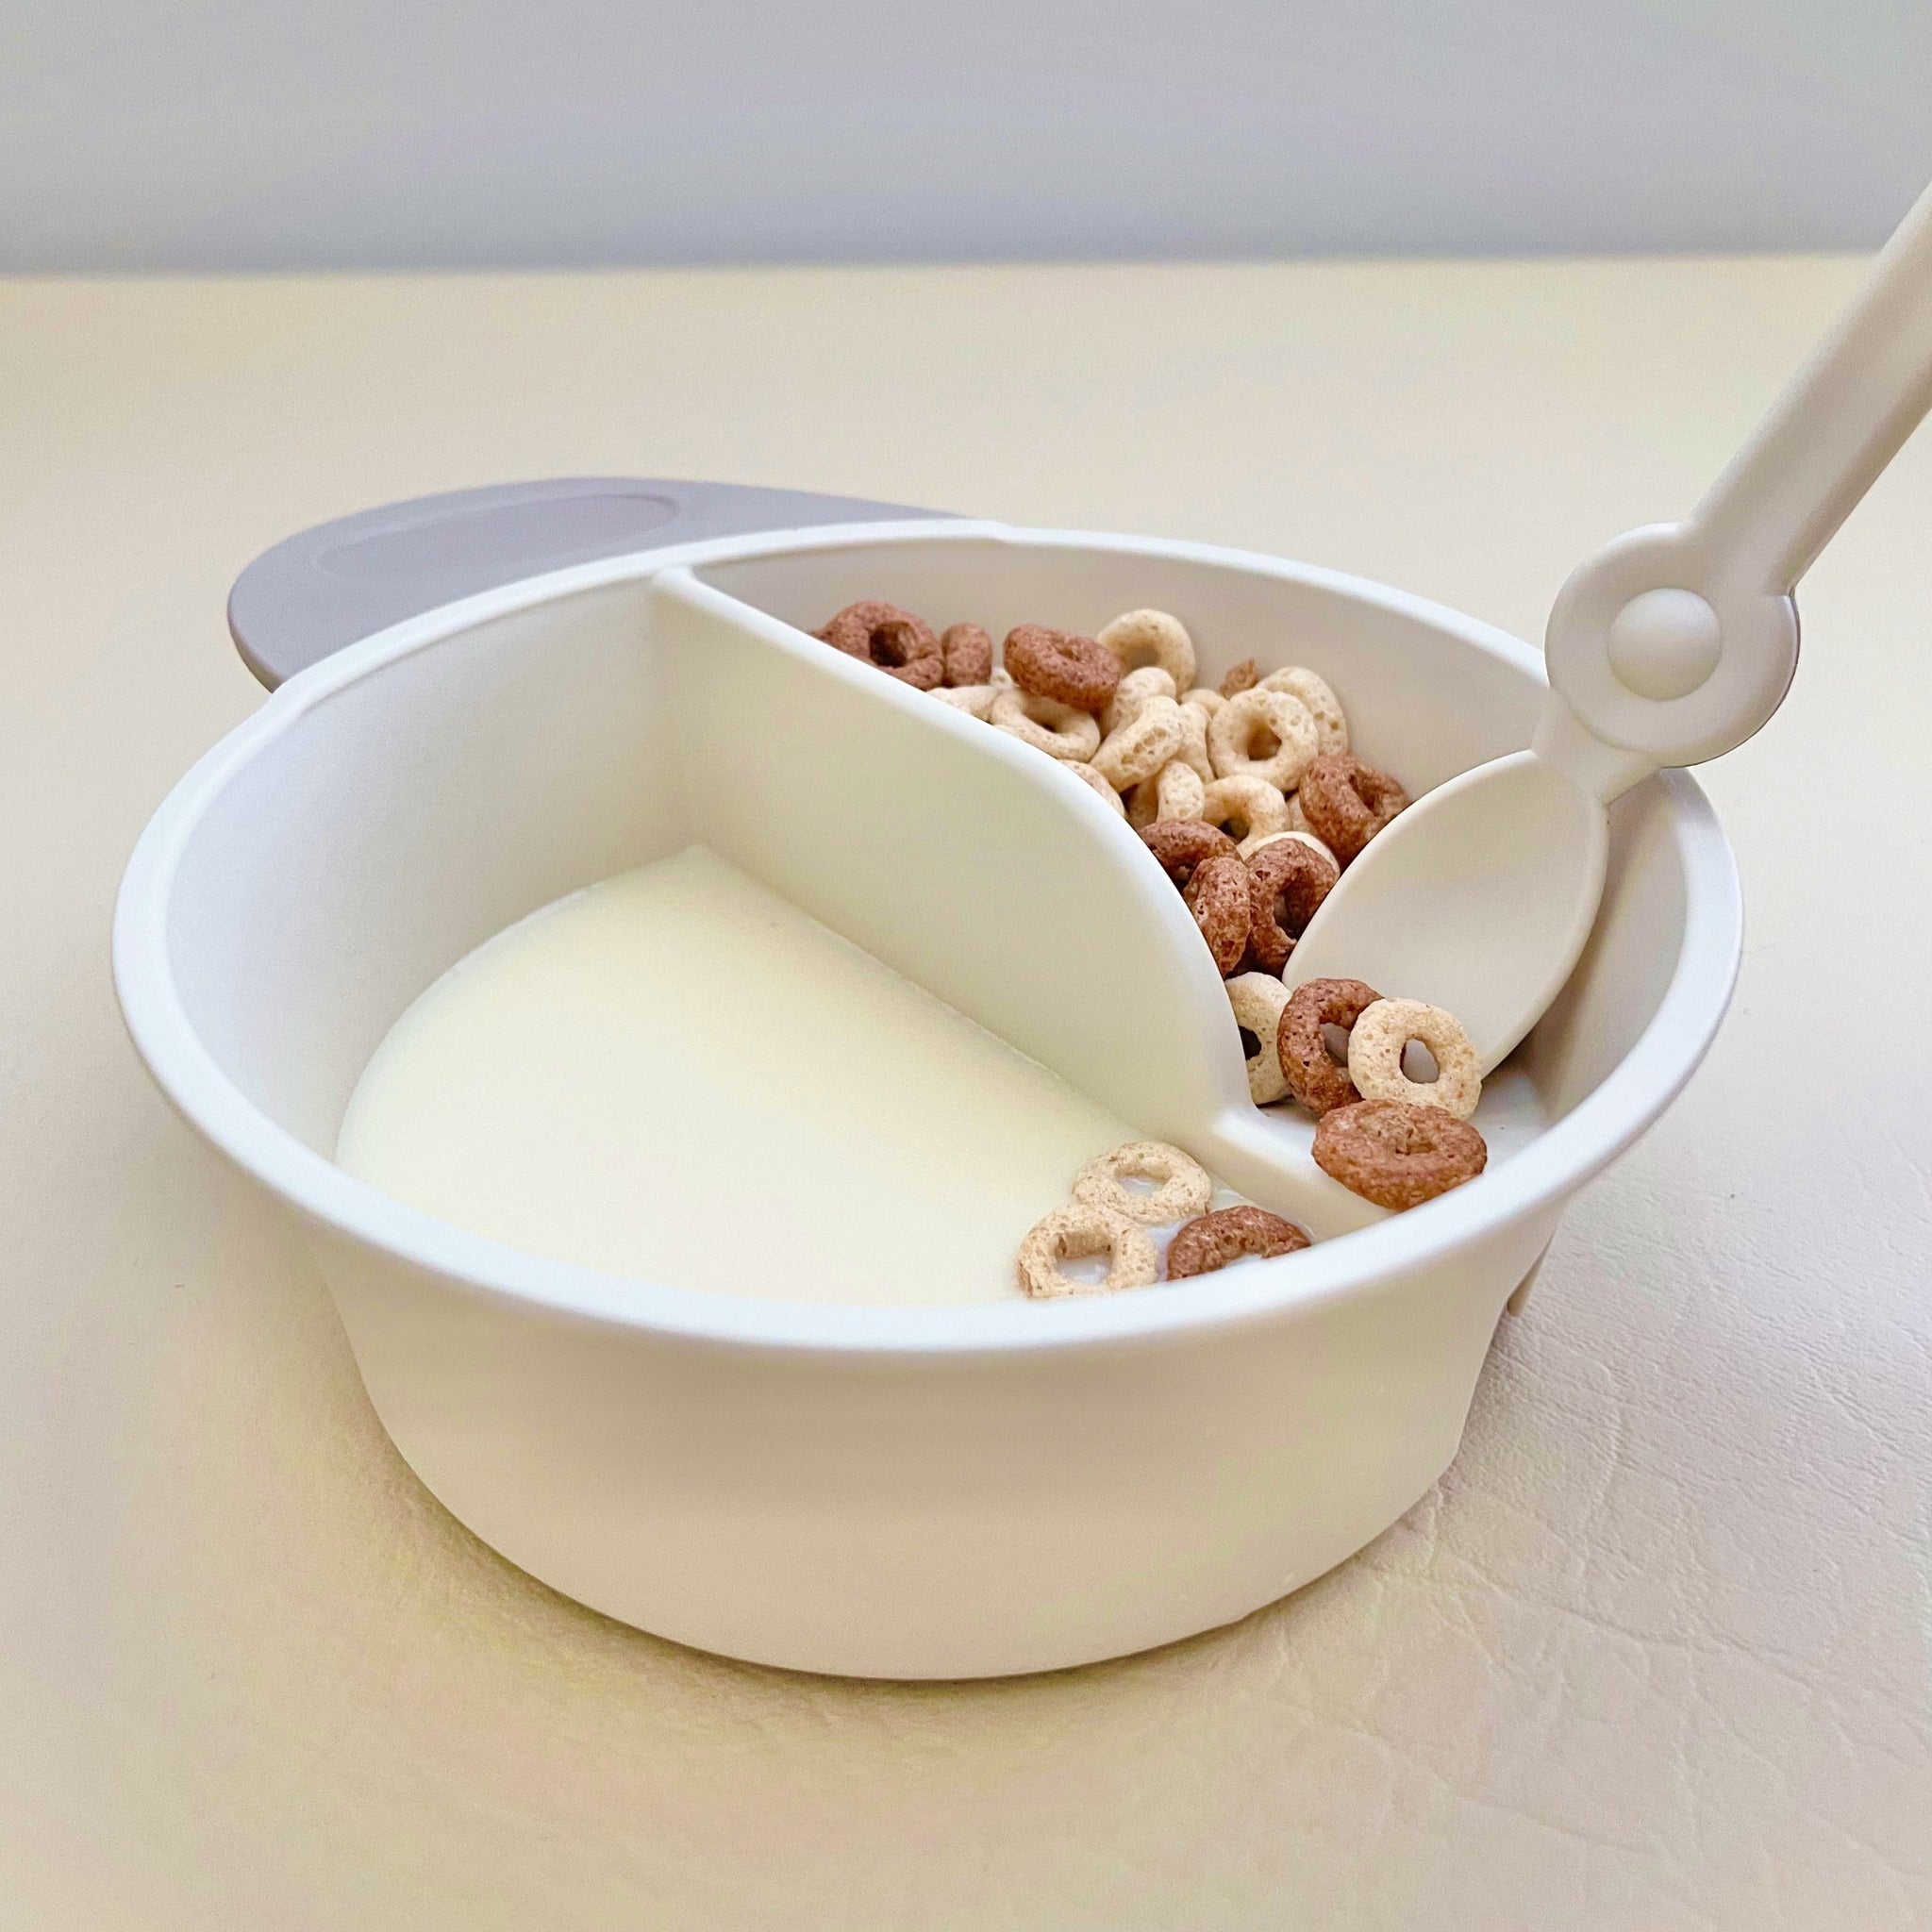 This Clever Bowl Keeps Your Cereal Crunchy by Separating it from